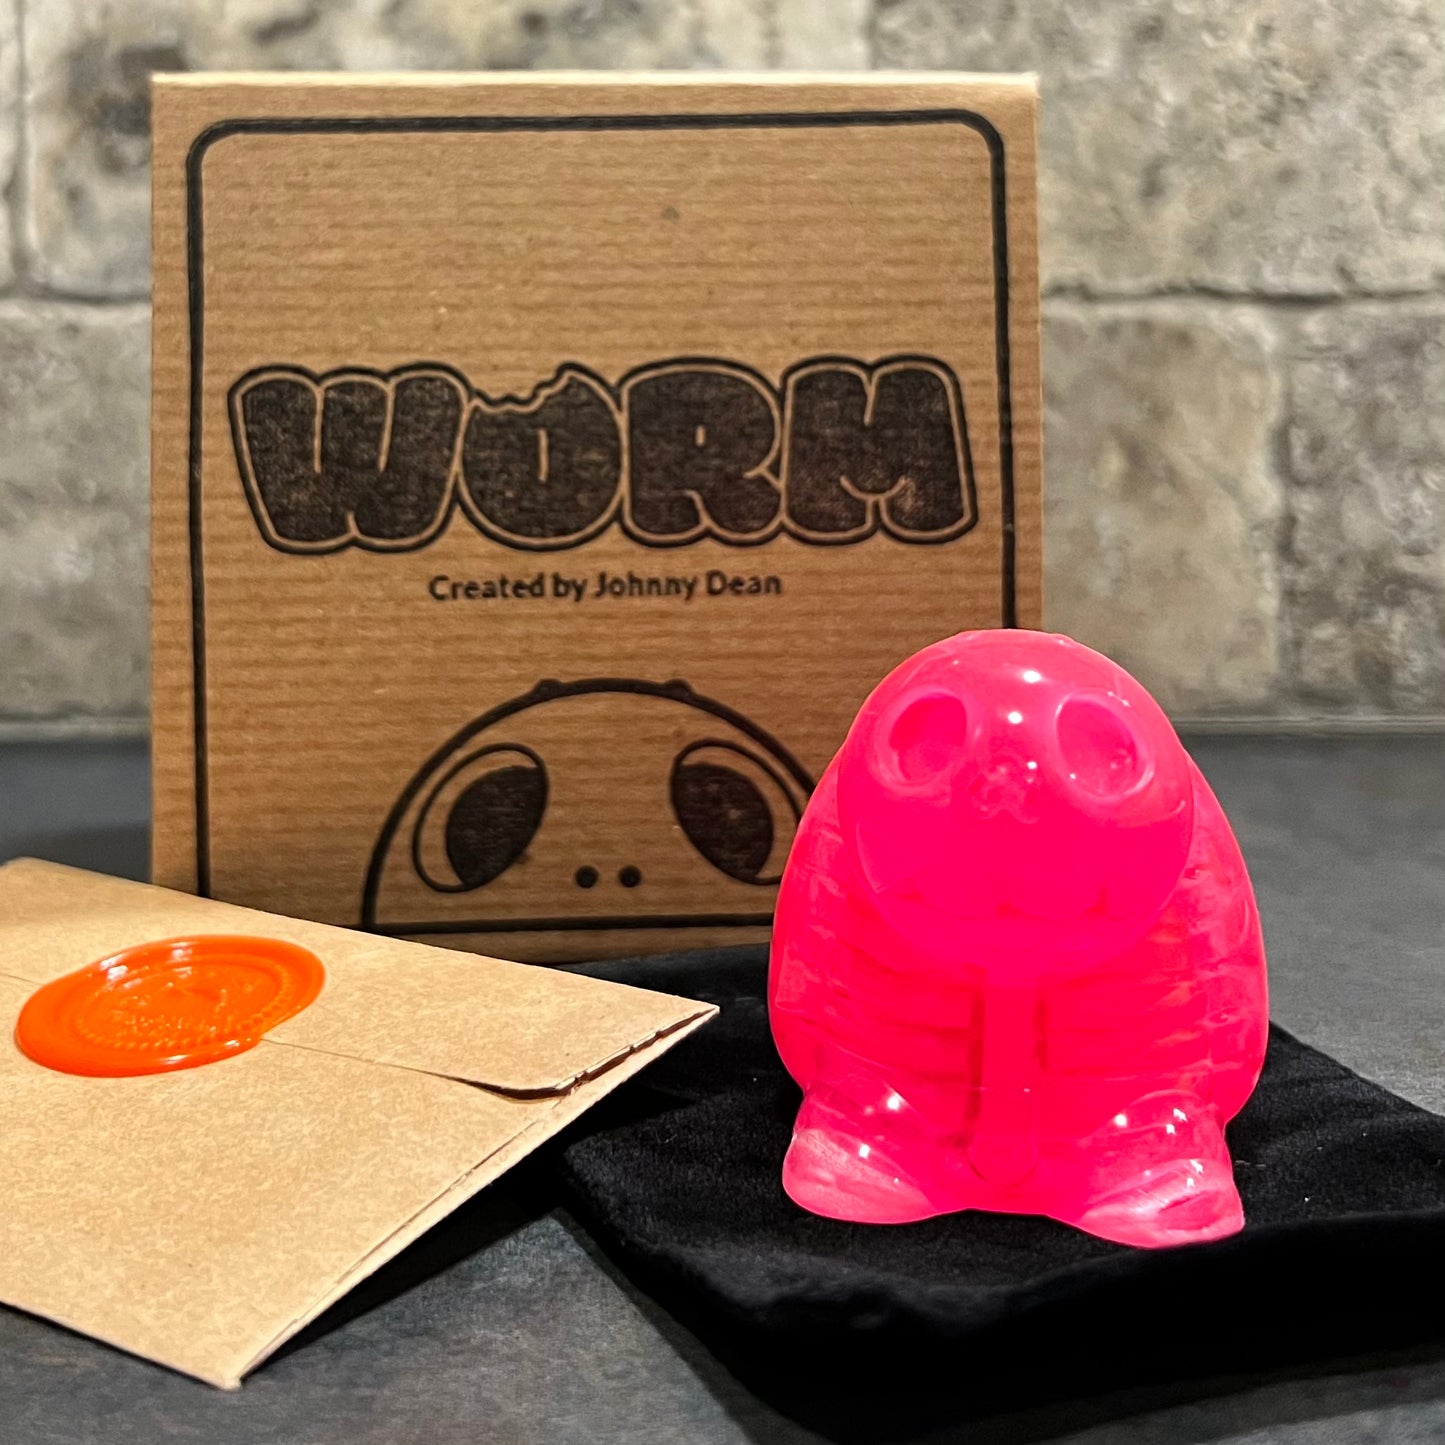 Worm Neon Cemetery Limited Edition Double-Cast Resin Figure